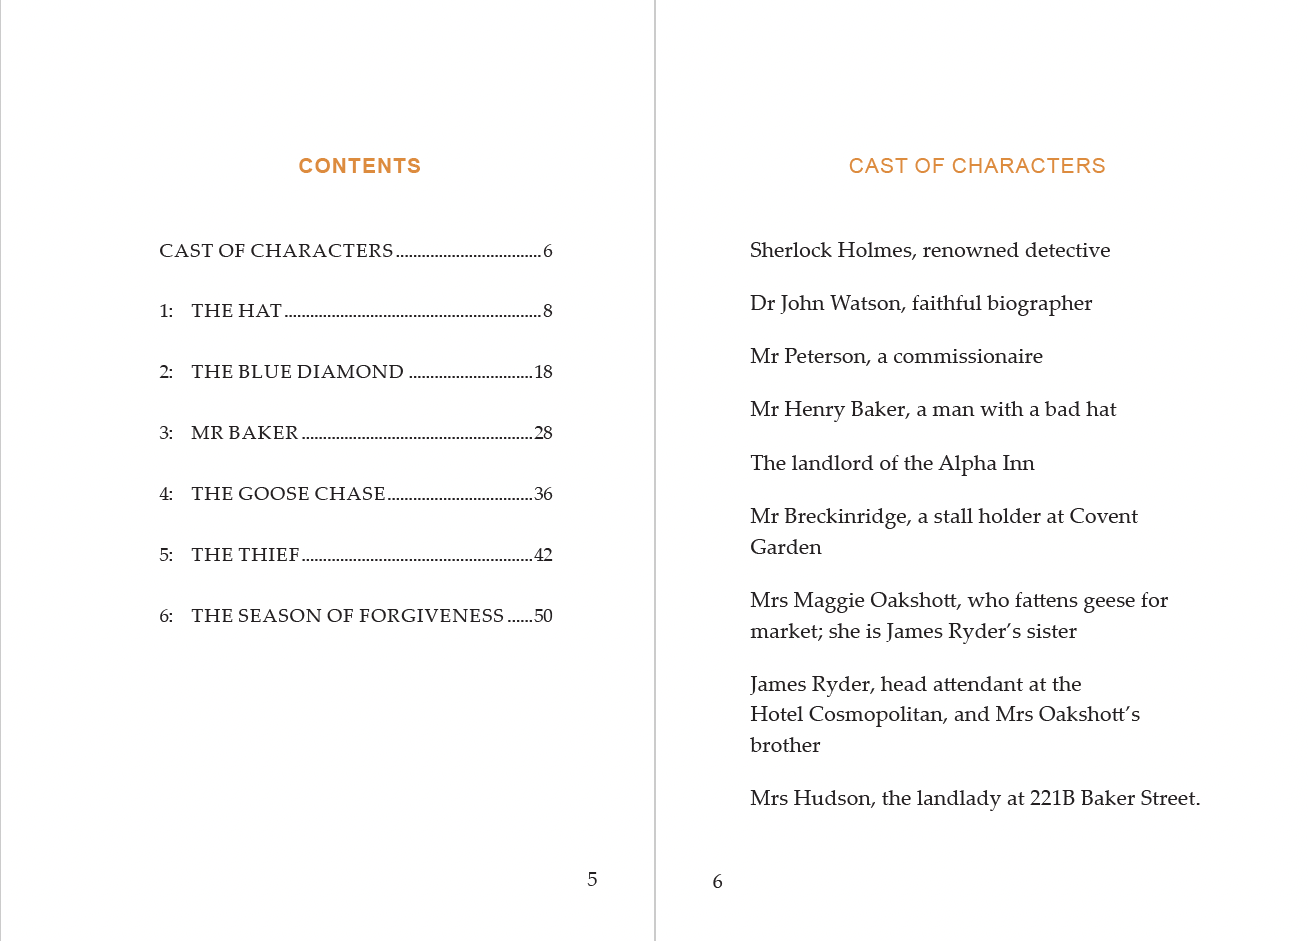 Sherlock Holmes book spread. Pgs 5-6. The contents page and cast of characters page